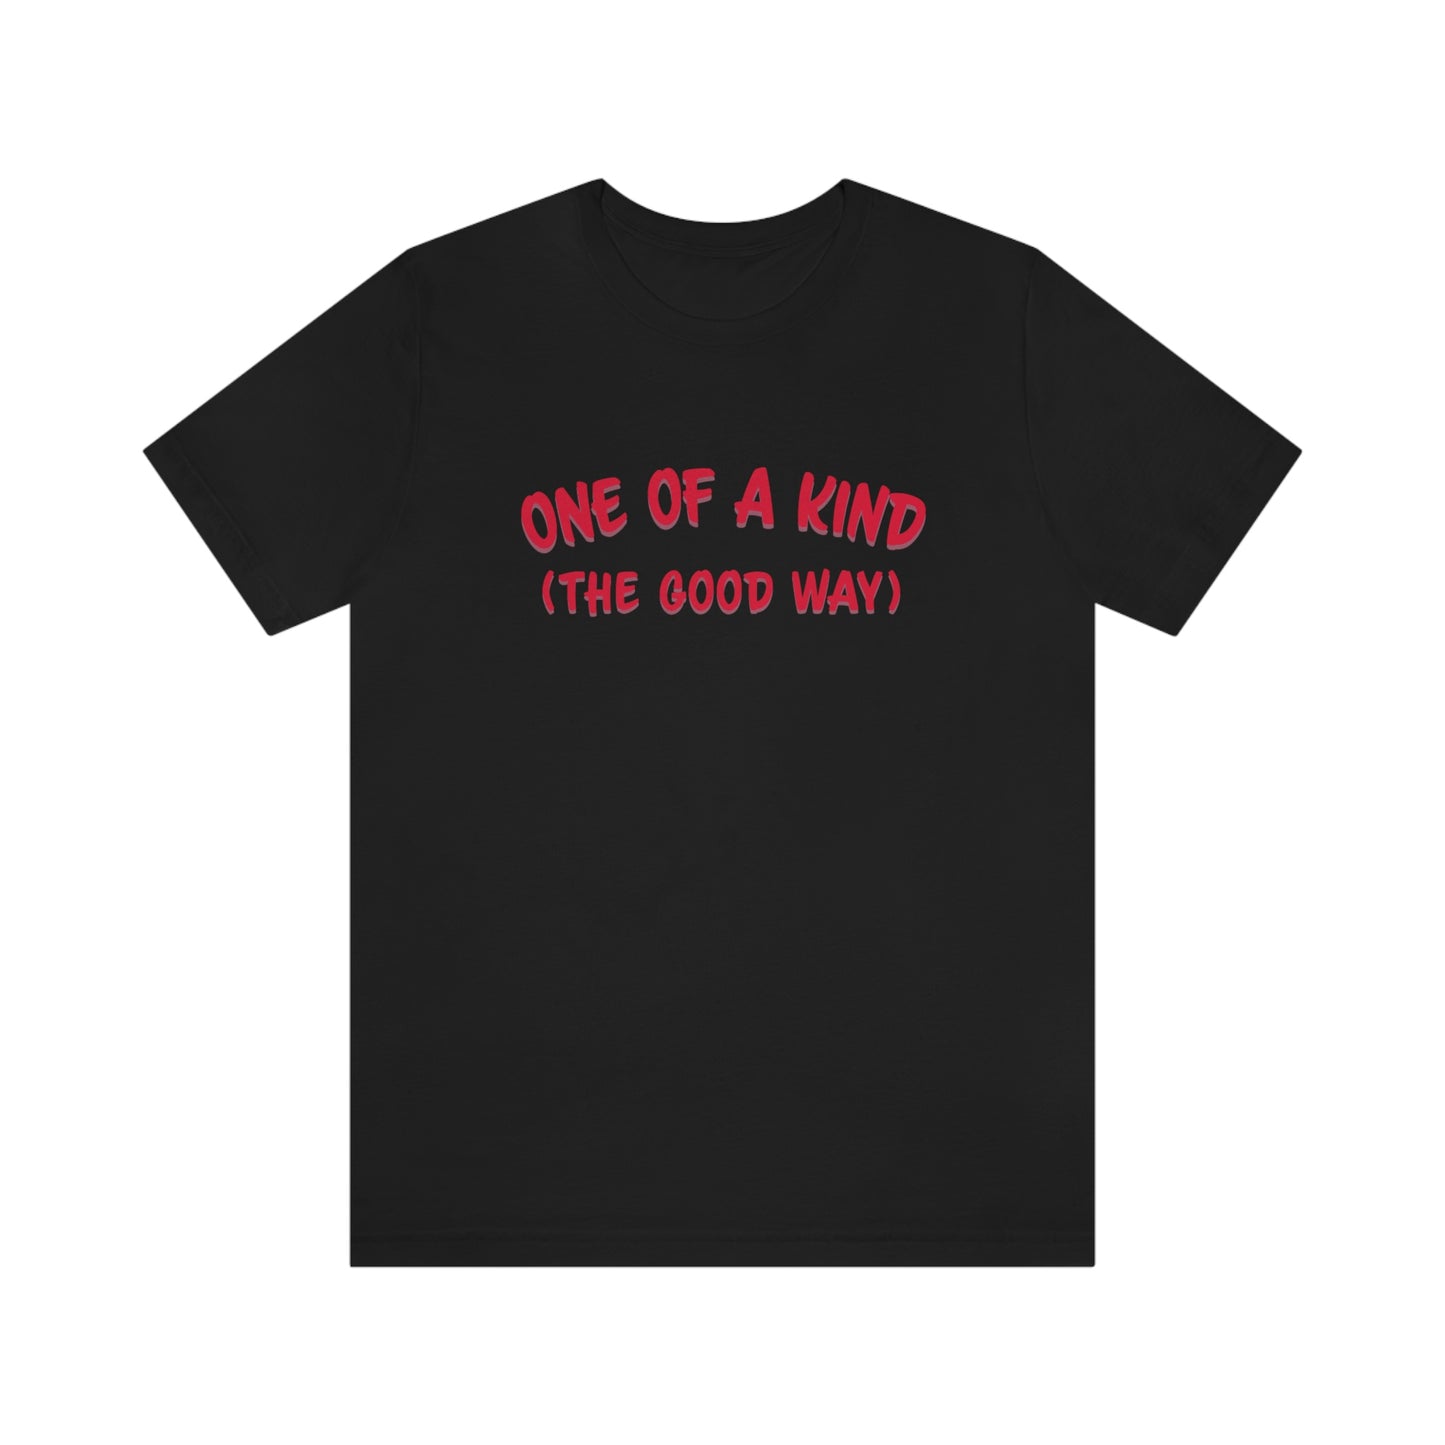 One of a Kind - Unisex T-Shirt